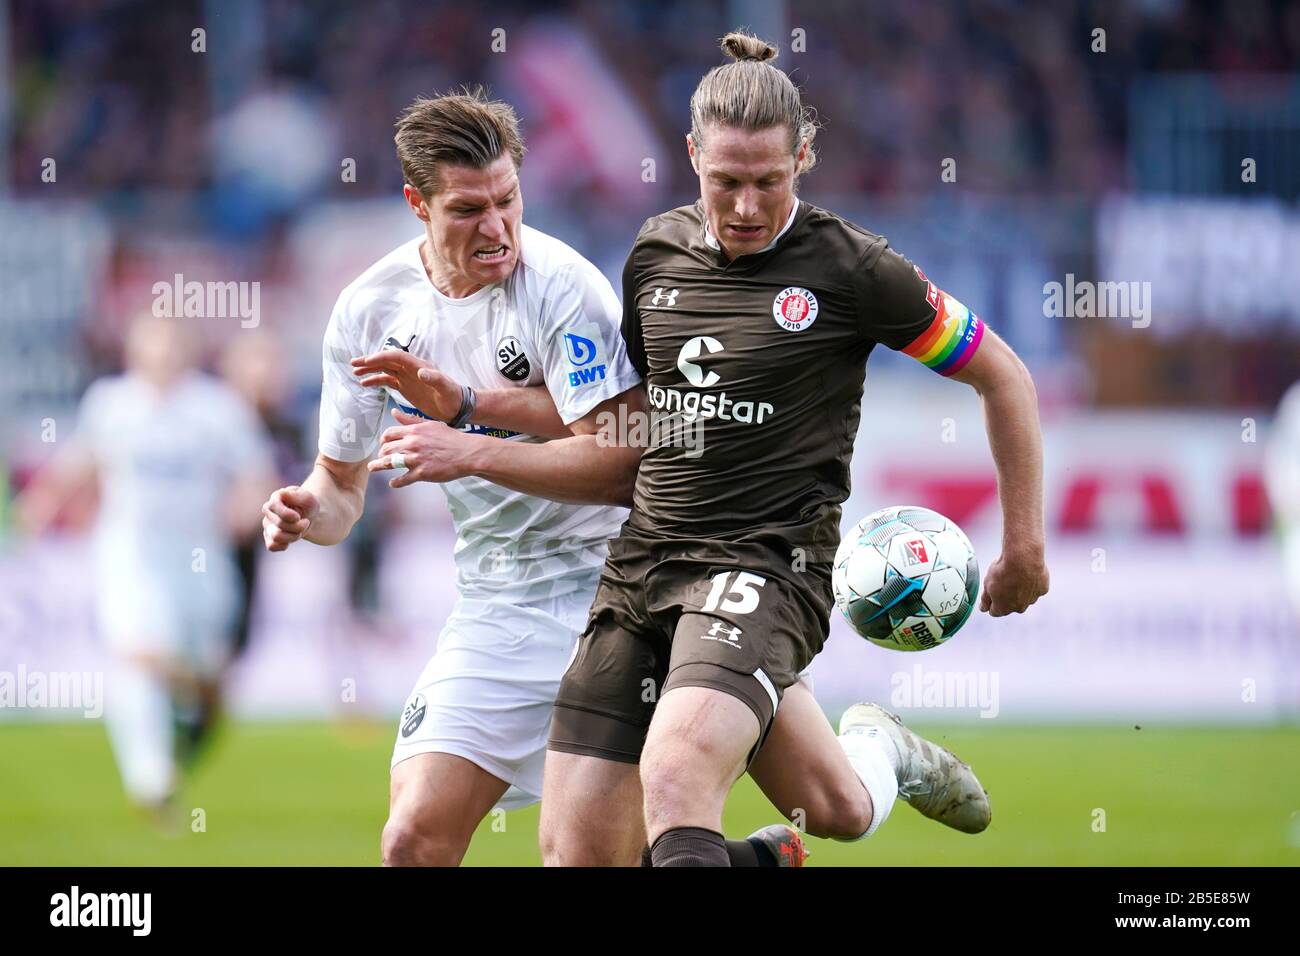 Sandhausen, Germany. 08th Mar, 2020. Football: 2nd Bundesliga, 25th matchday, SV Sandhausen - FC St. Pauli, Hardtwaldstadion. Sandhausen's Kevin Behrens (l) and St. Paulis Daniel Buballa fight for the ball. Credit: Uwe Anspach/dpa - IMPORTANT NOTE: In accordance with the regulations of the DFL Deutsche Fußball Liga and the DFB Deutscher Fußball-Bund, it is prohibited to exploit or have exploited in the stadium and/or from the game taken photographs in the form of sequence images and/or video-like photo series./dpa/Alamy Live News Stock Photo